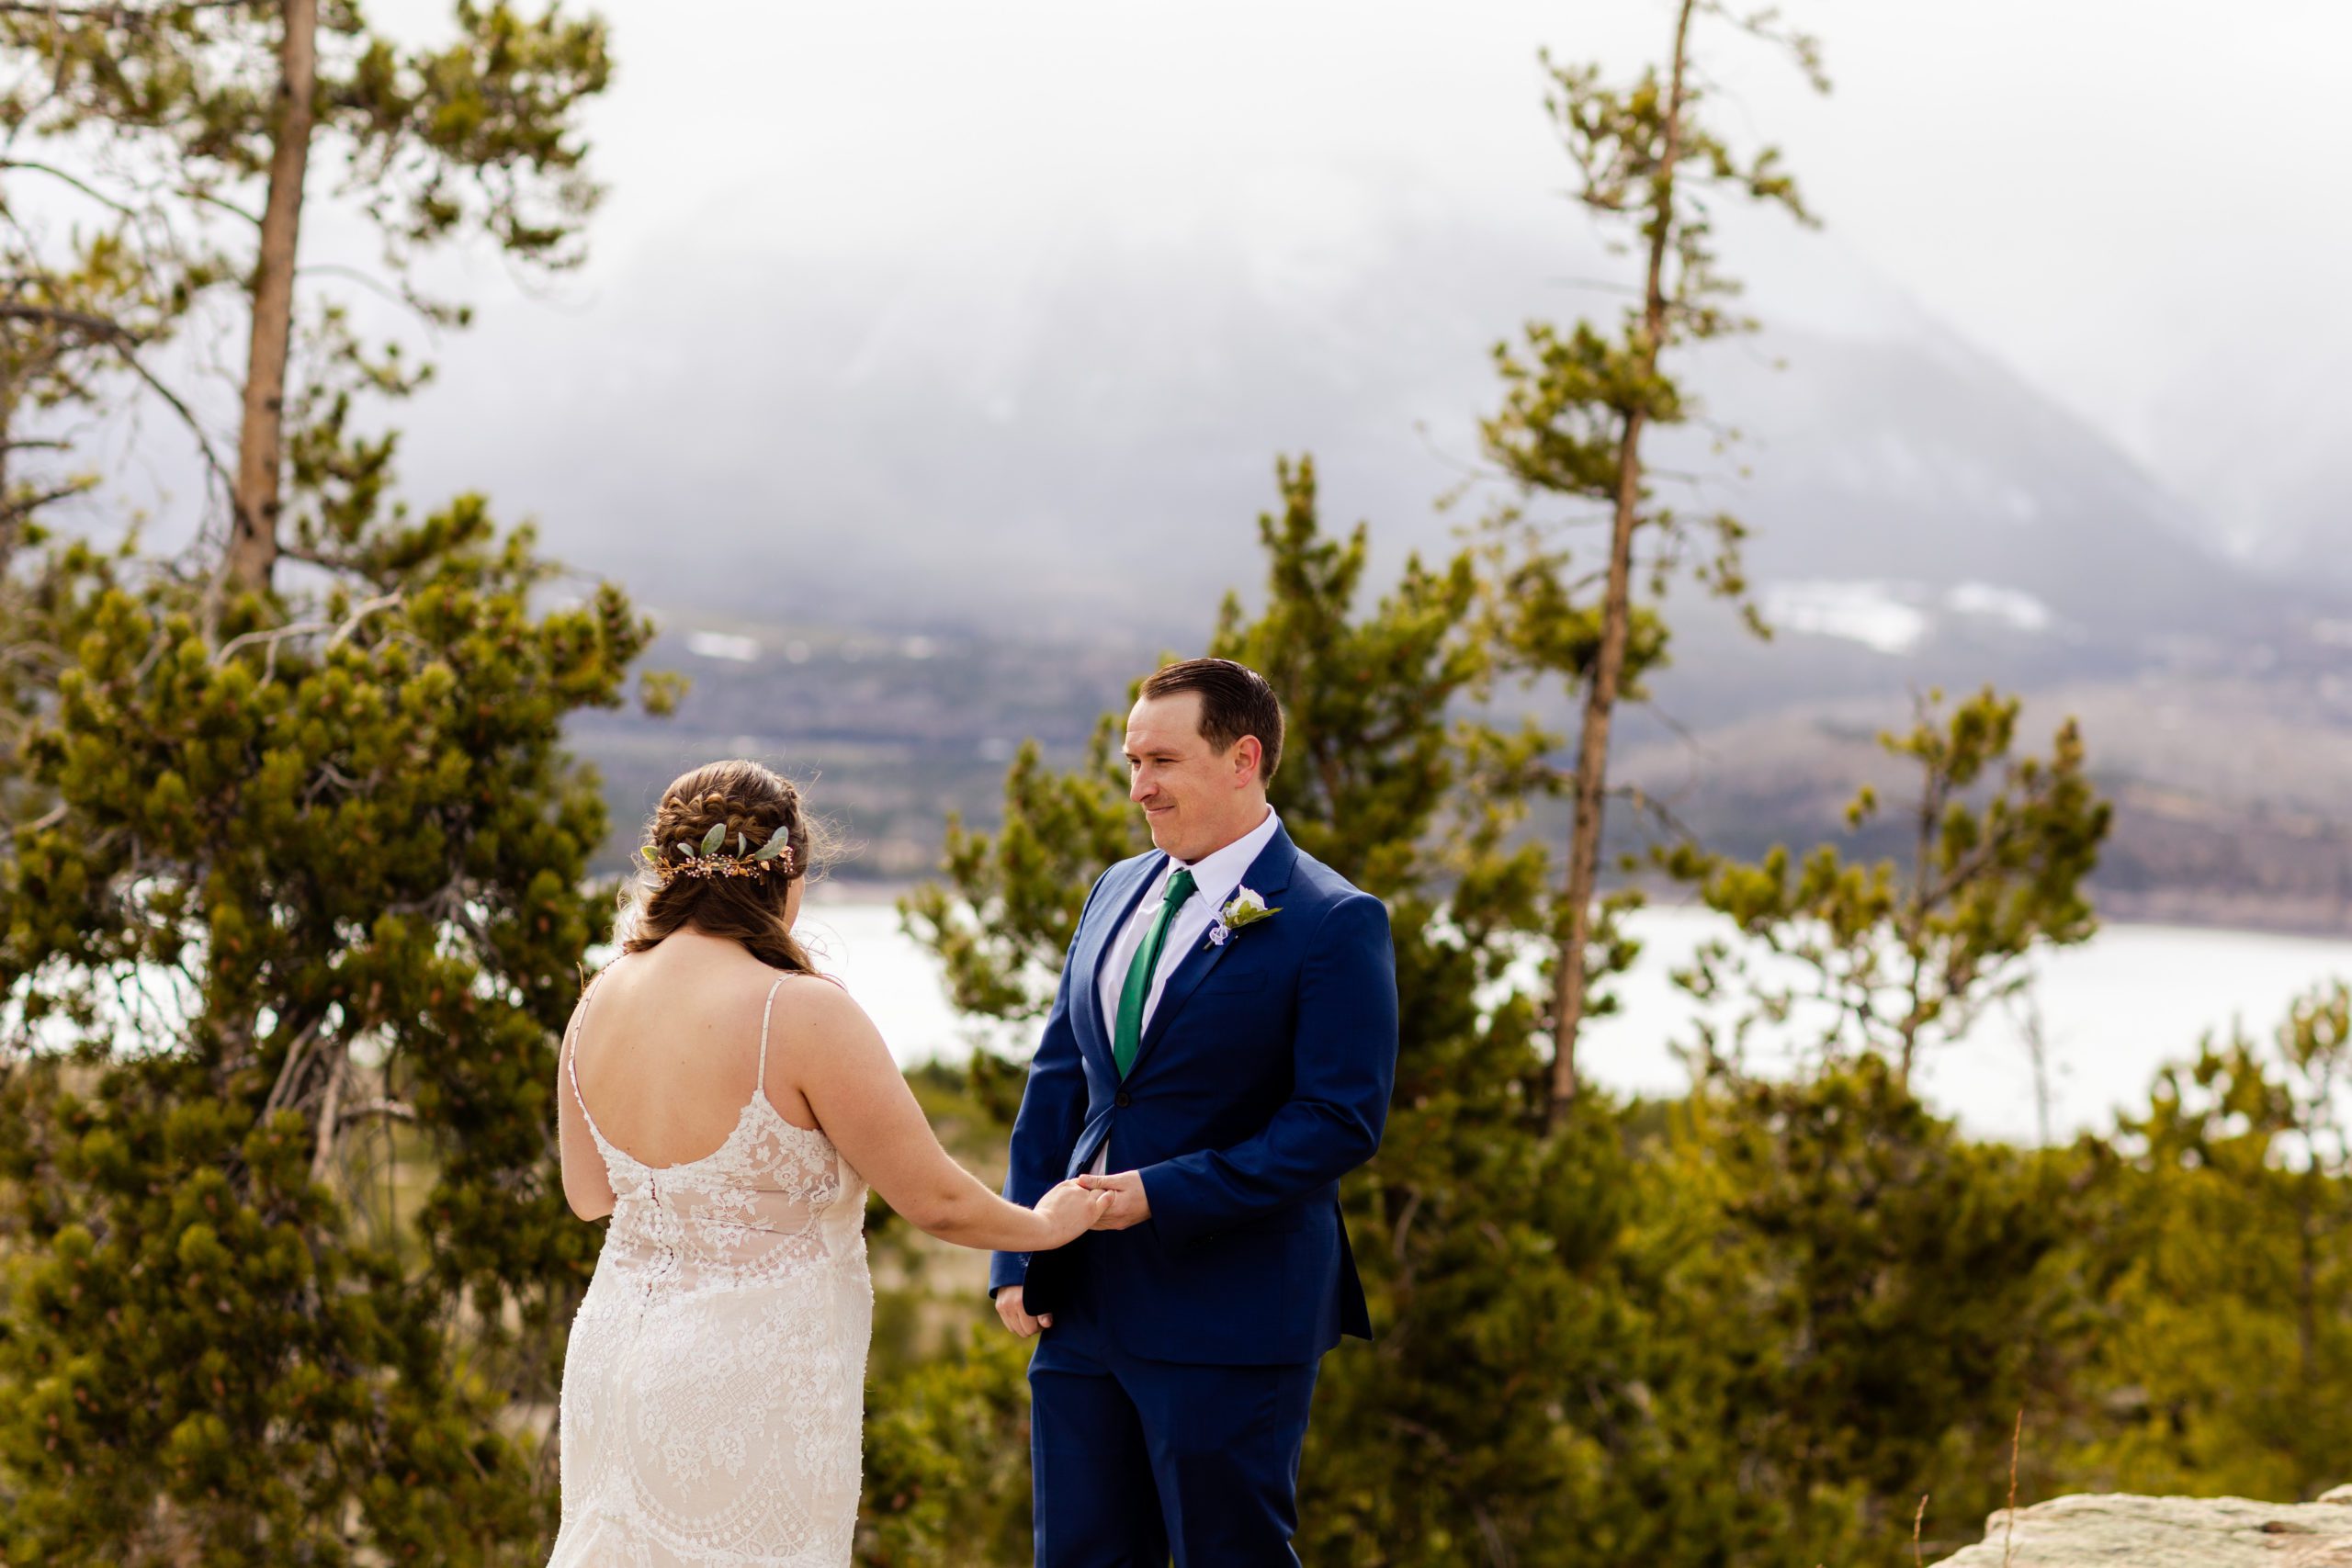 The groom smiles at his bride while she reads her vows to him before their Sapphire Point Elopement.